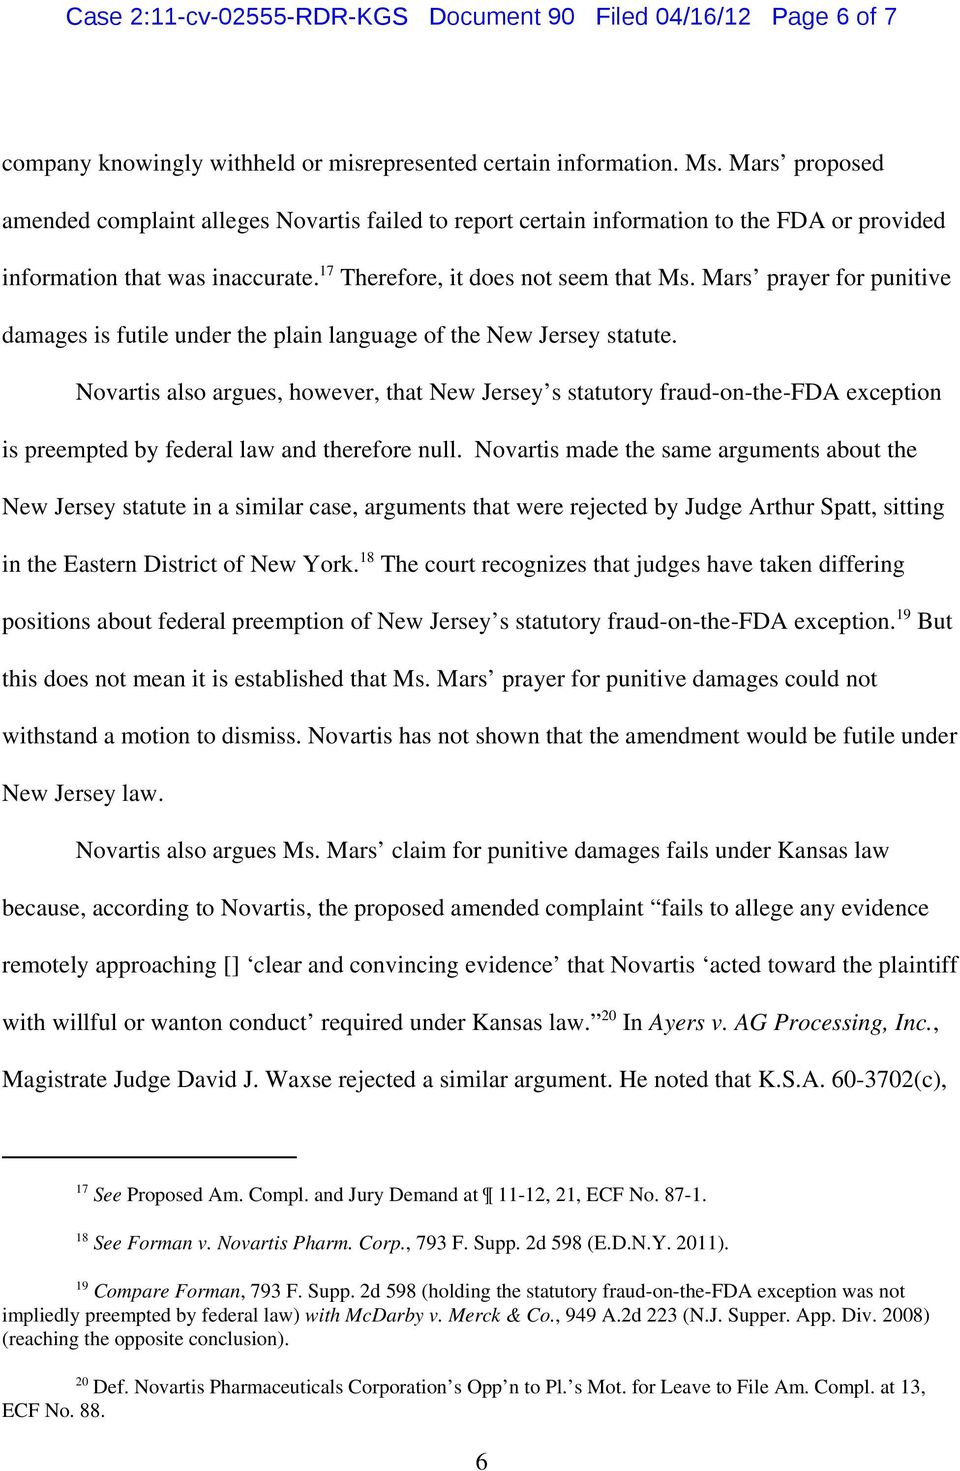 Mars prayer for punitive damages is futile under the plain language of the New Jersey statute.